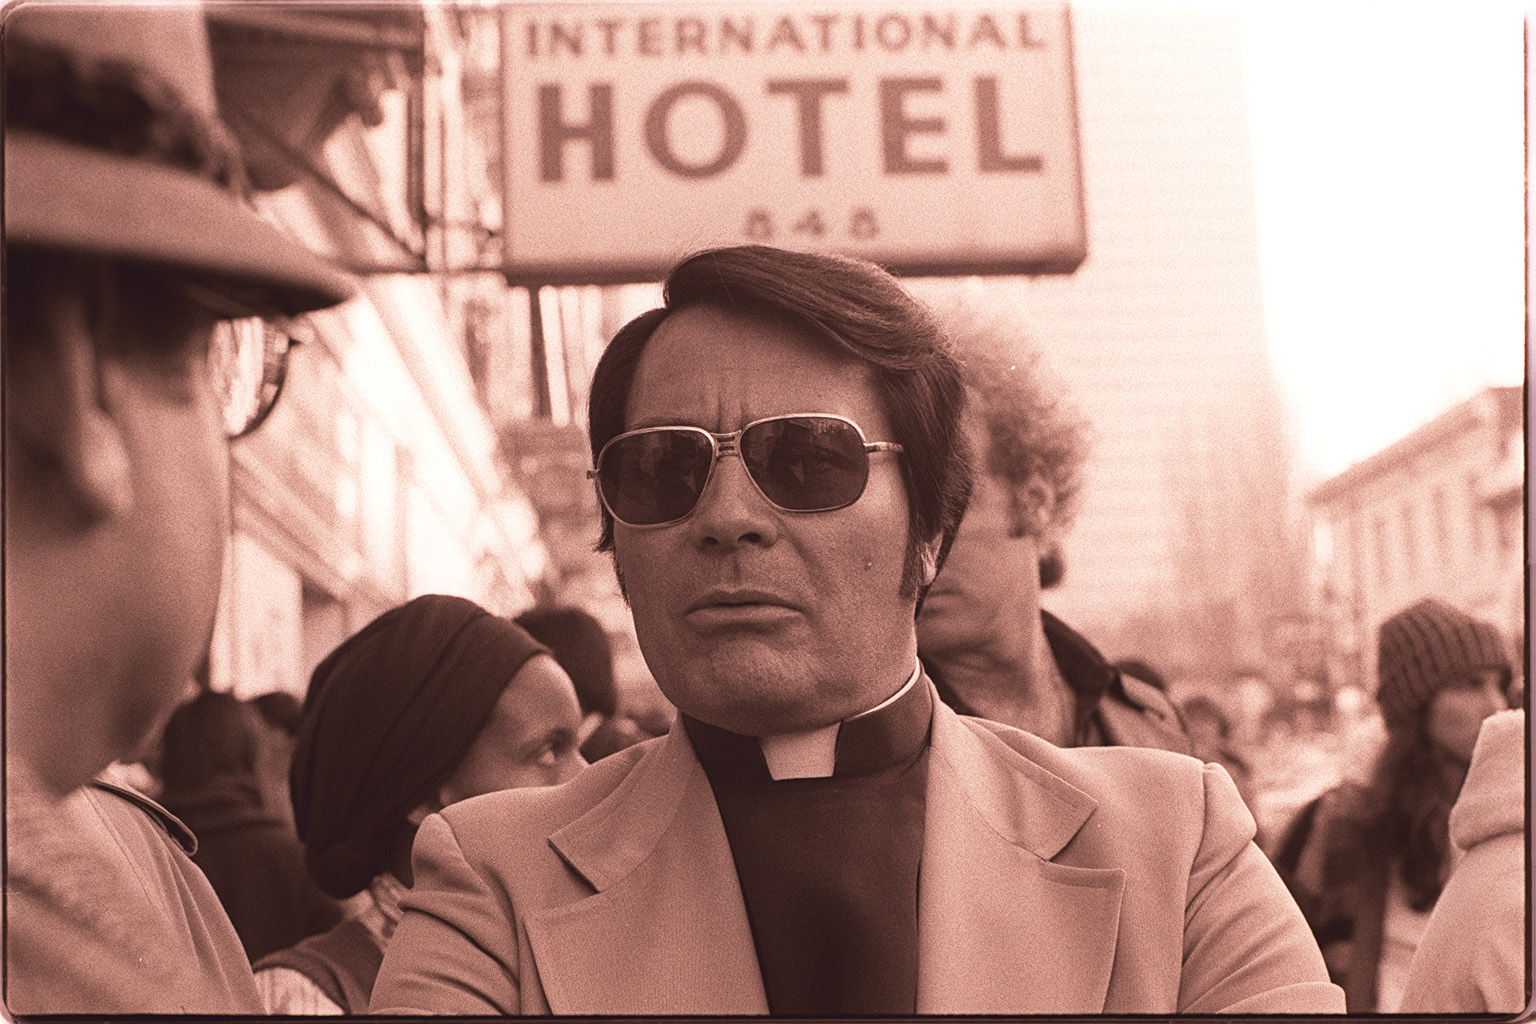 Jim Jones at an anti-eviction rally in Manilatown, January 16, 1977. (Photograph by Nancy Wong)